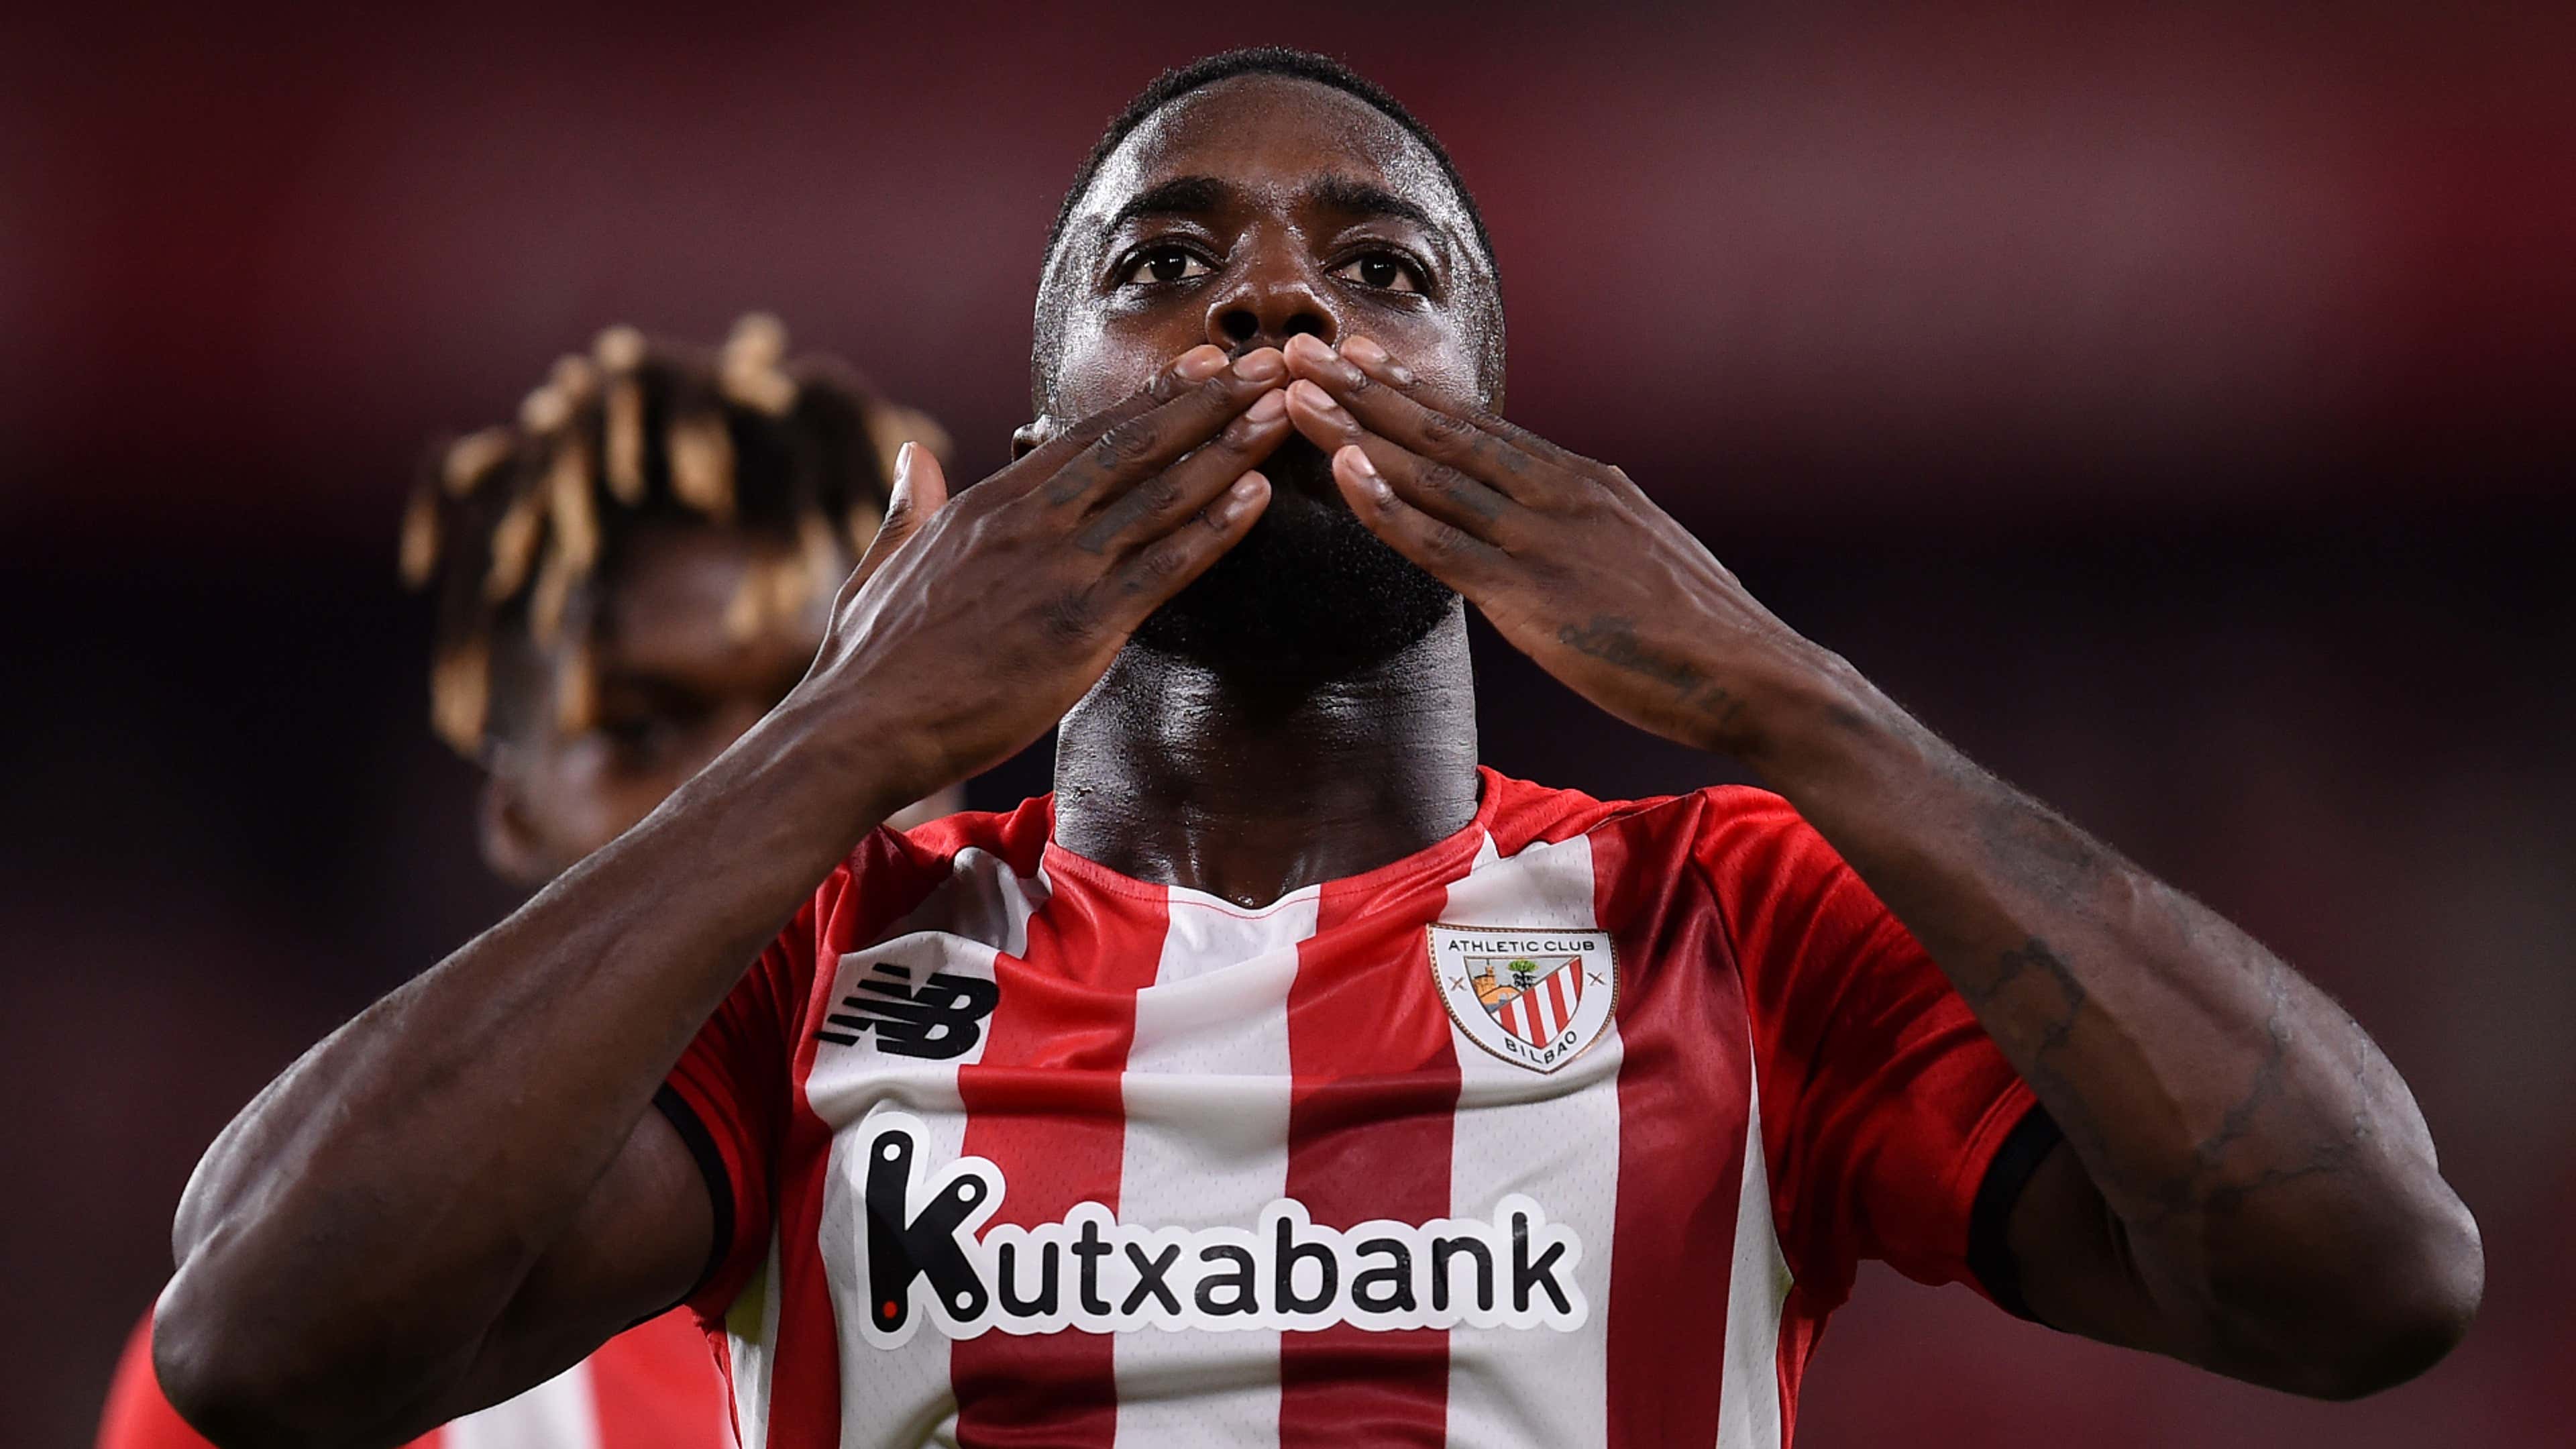 Athletic Club star Williams completes Ghana switch ahead of 2022 World Cup  